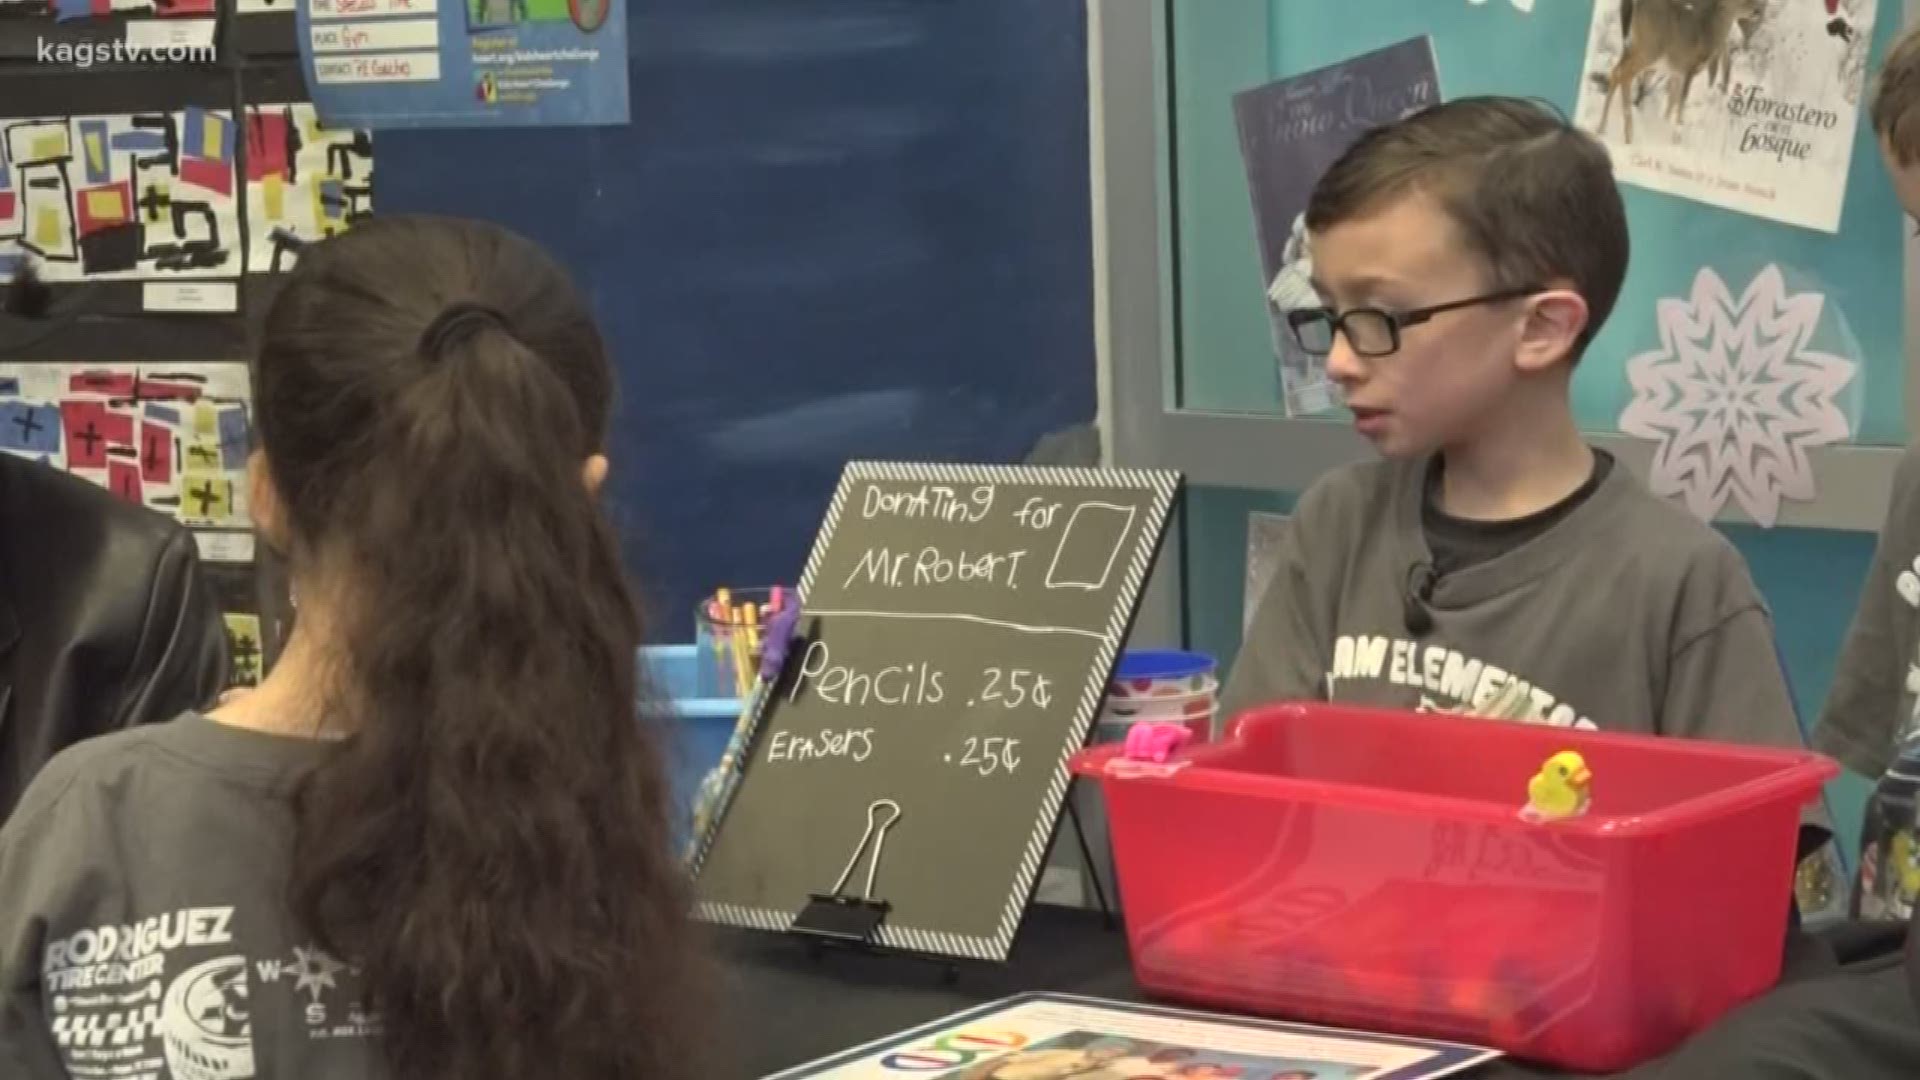 After finding out the school custodian was having health issues and needed surgery, a Bonham Elementary School student wanted to help anyway he could.